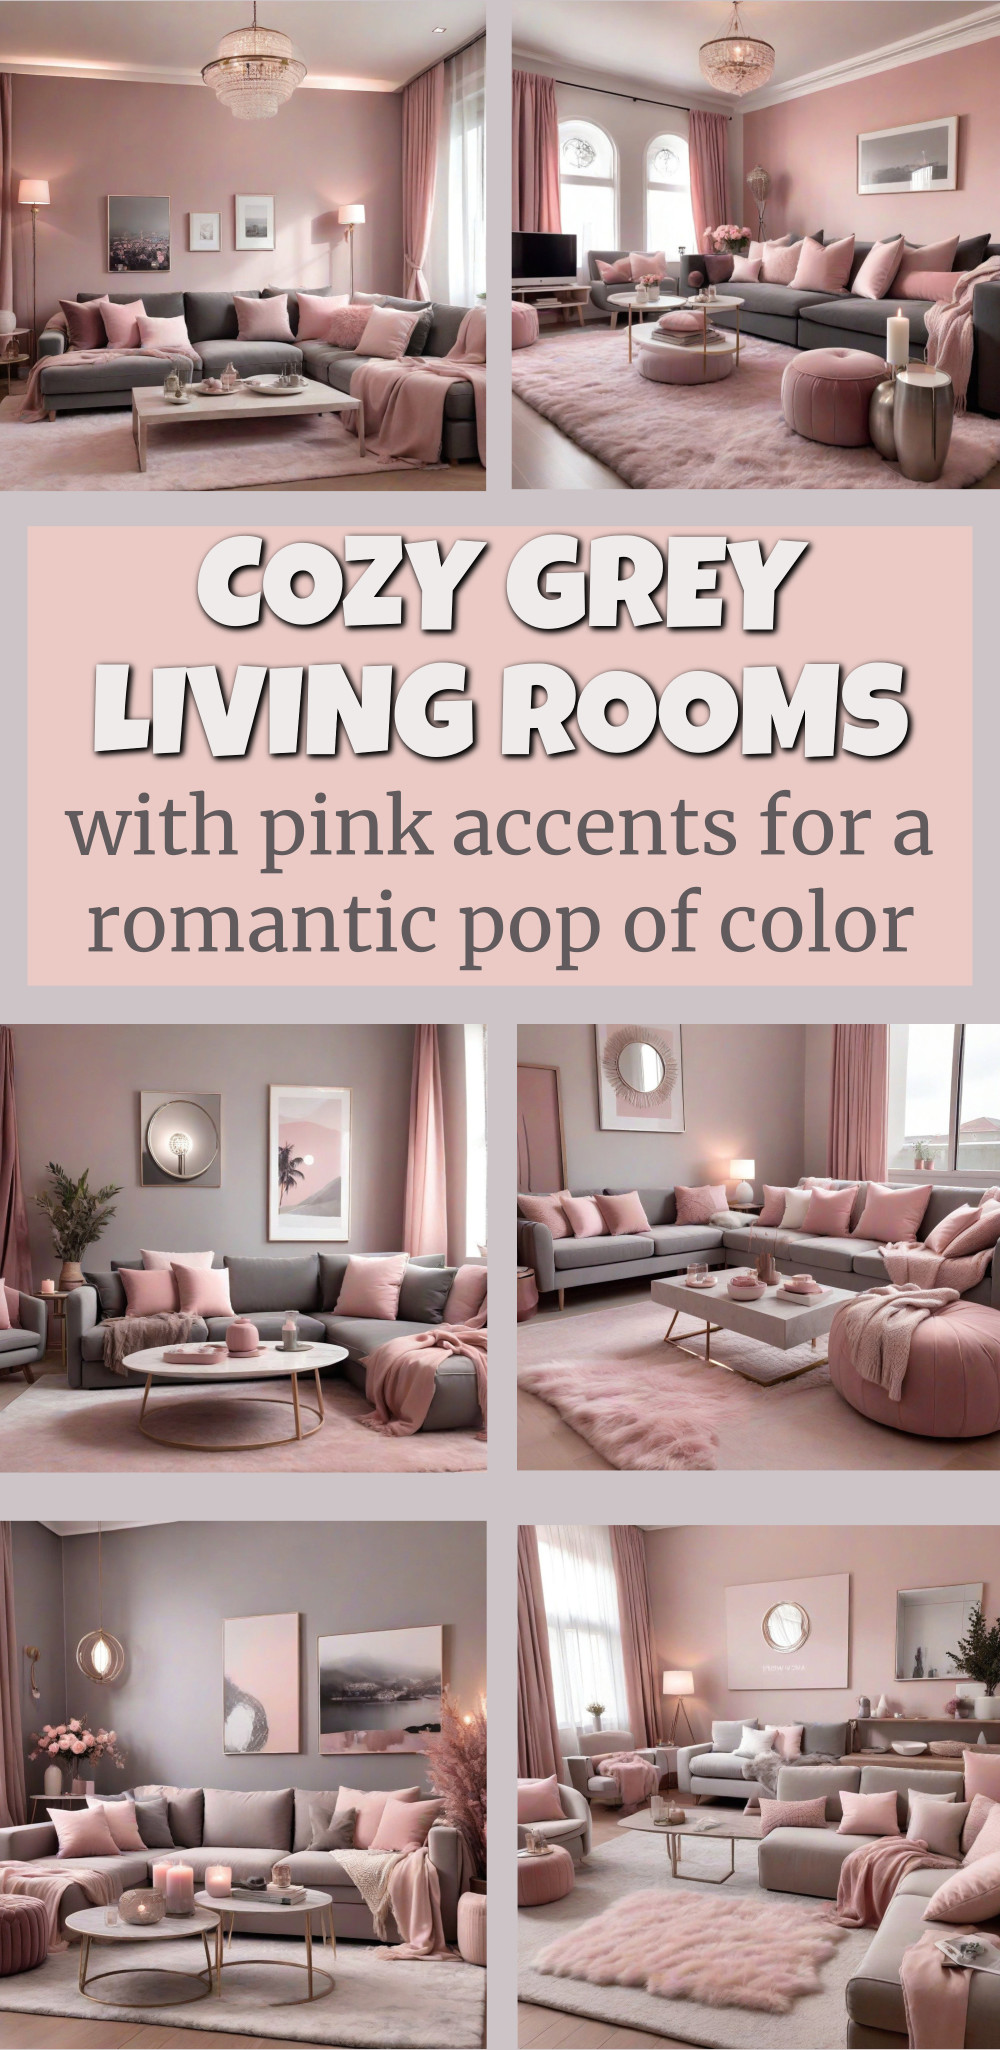 cozy grey living rooms with pink accents for a romantic pop of color